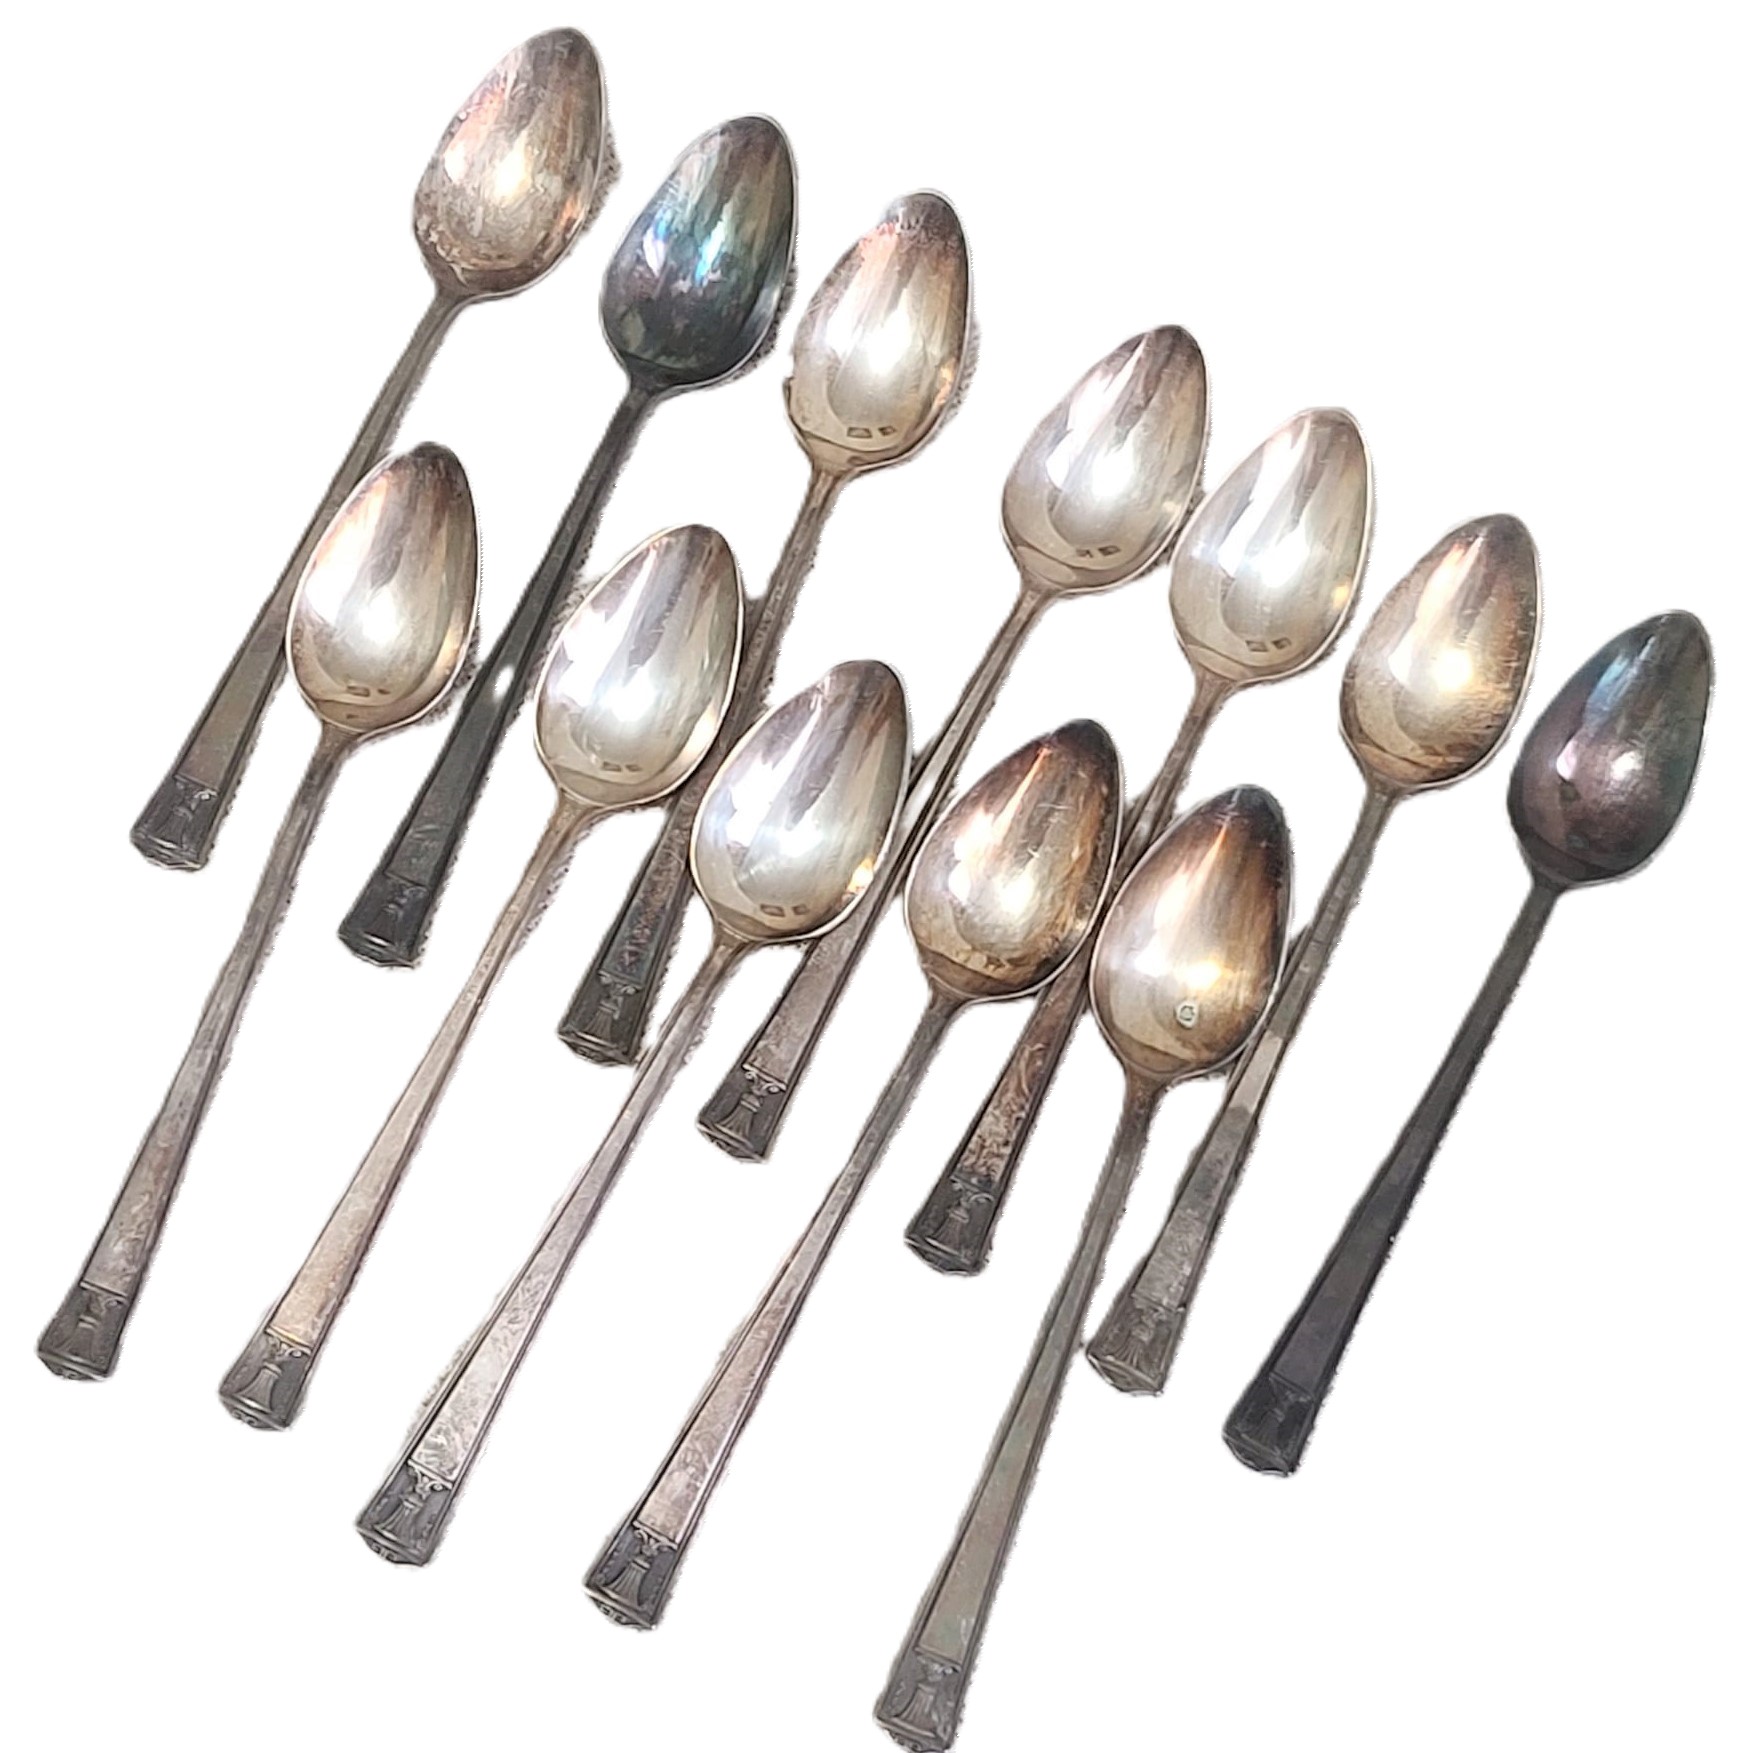 Vintage Silve Plated Tea Spoons Set of 12 Liberty Bell design - Click Image to Close